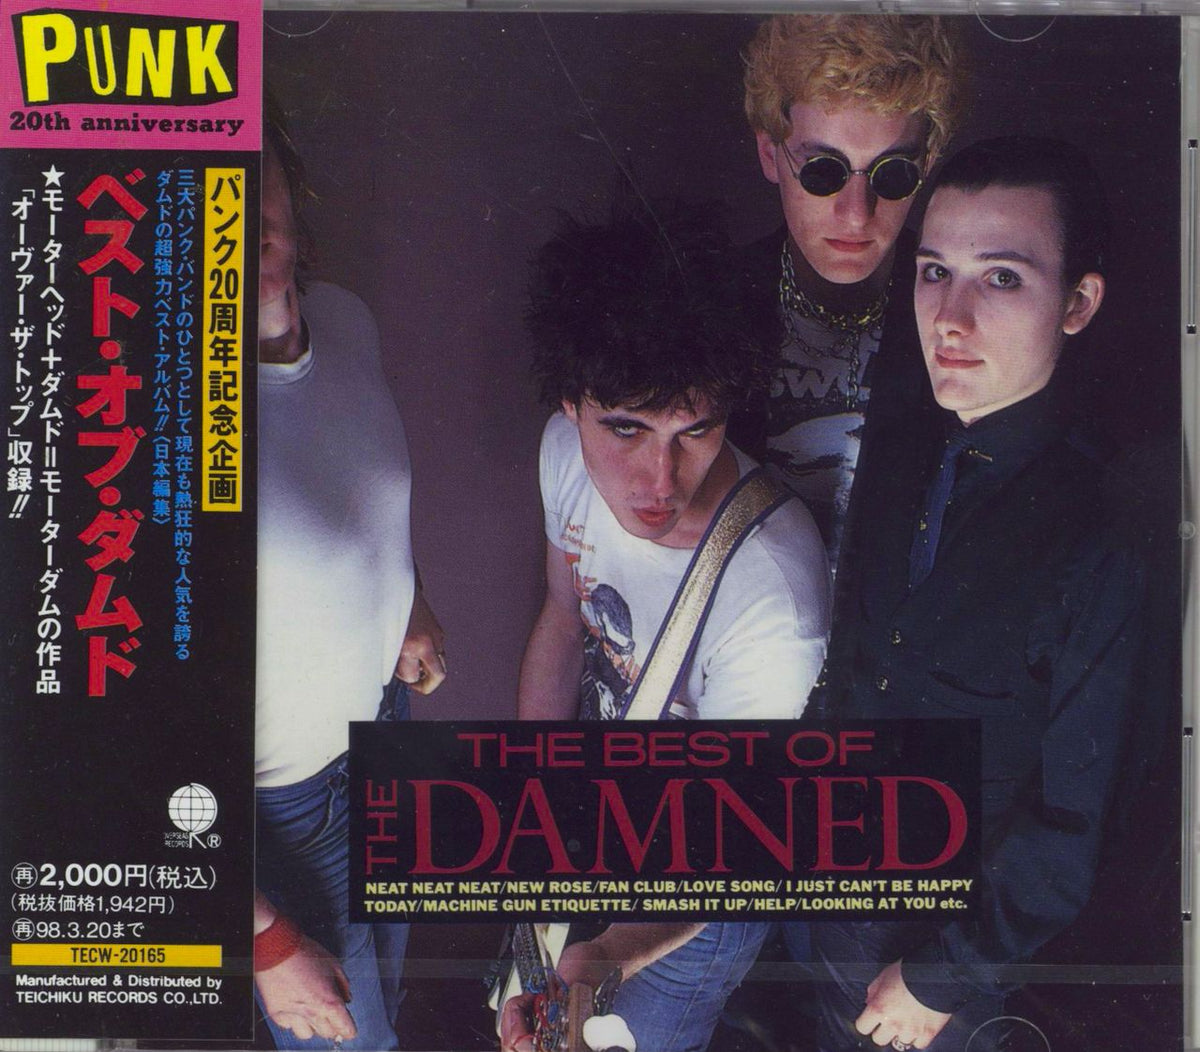 THE DAMNED PROBLEM CHILD - 洋楽